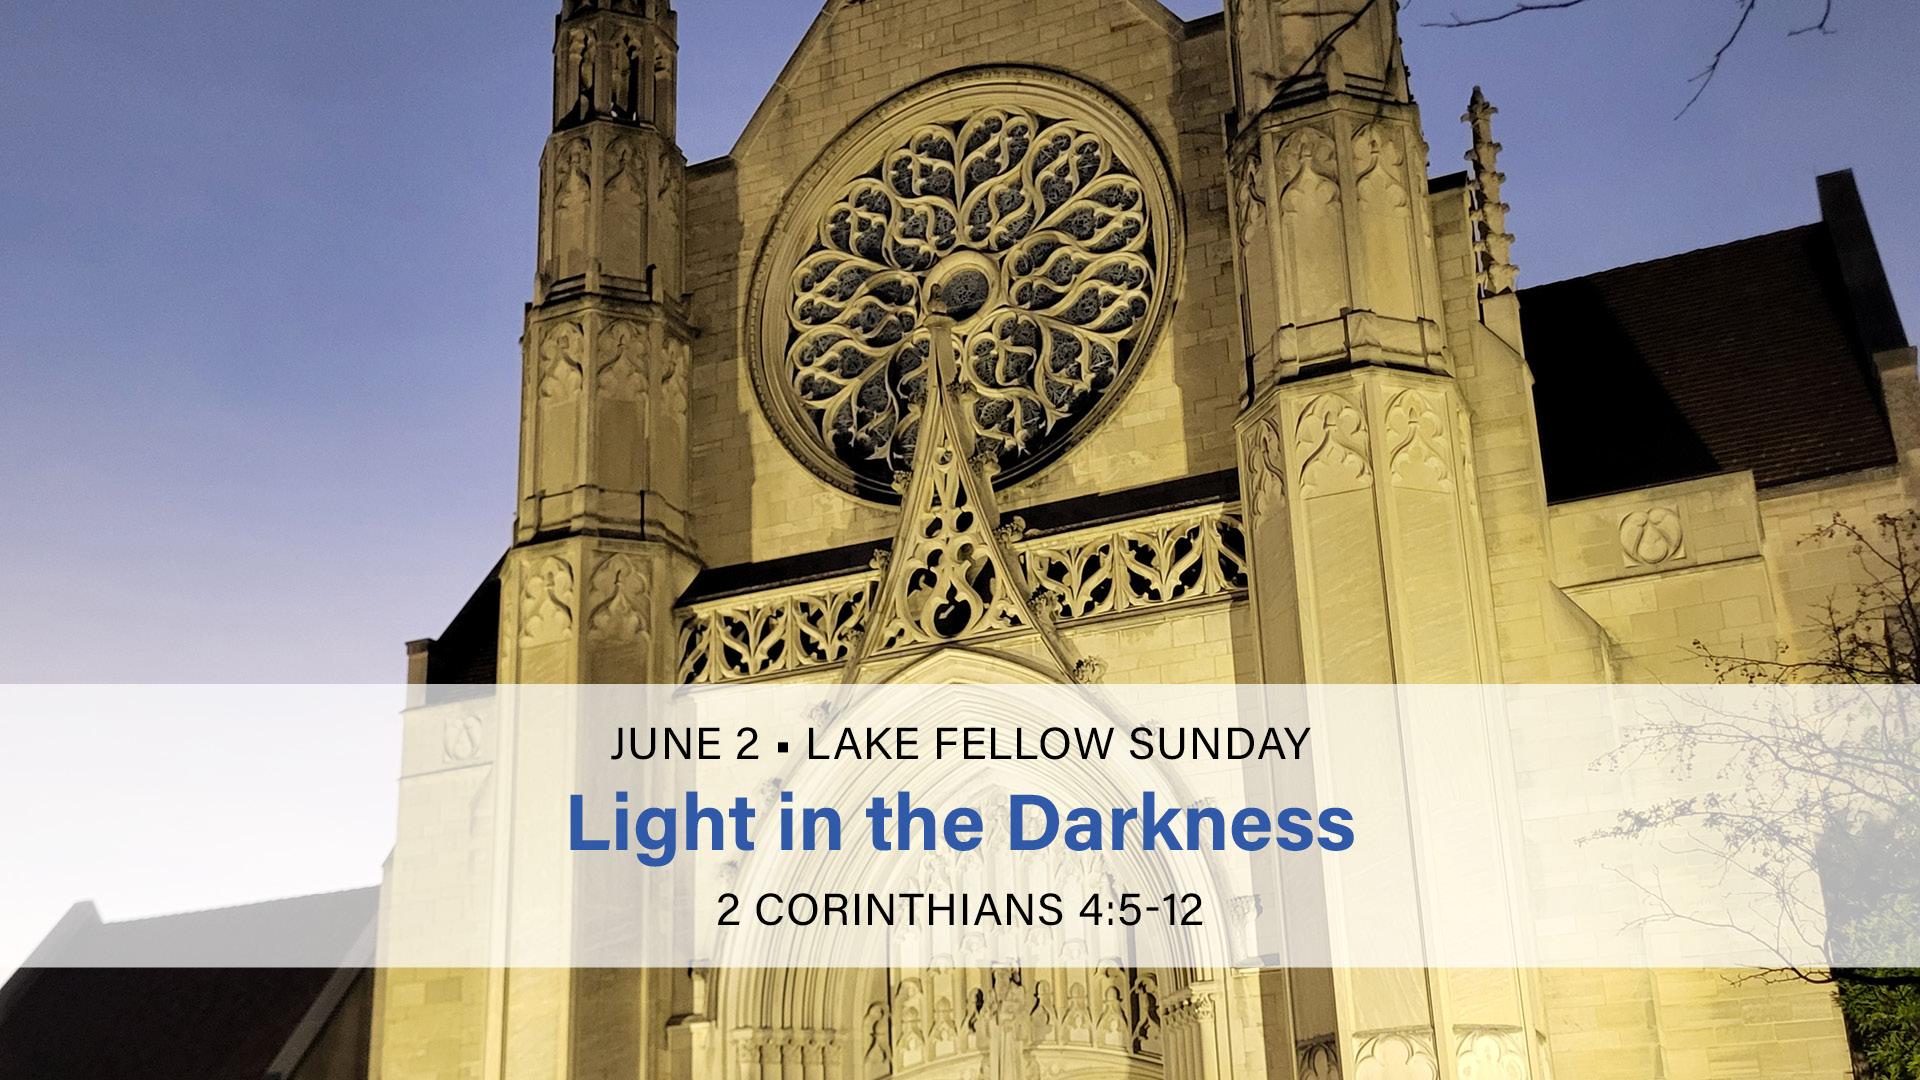 June 2 - Light in the Darkness